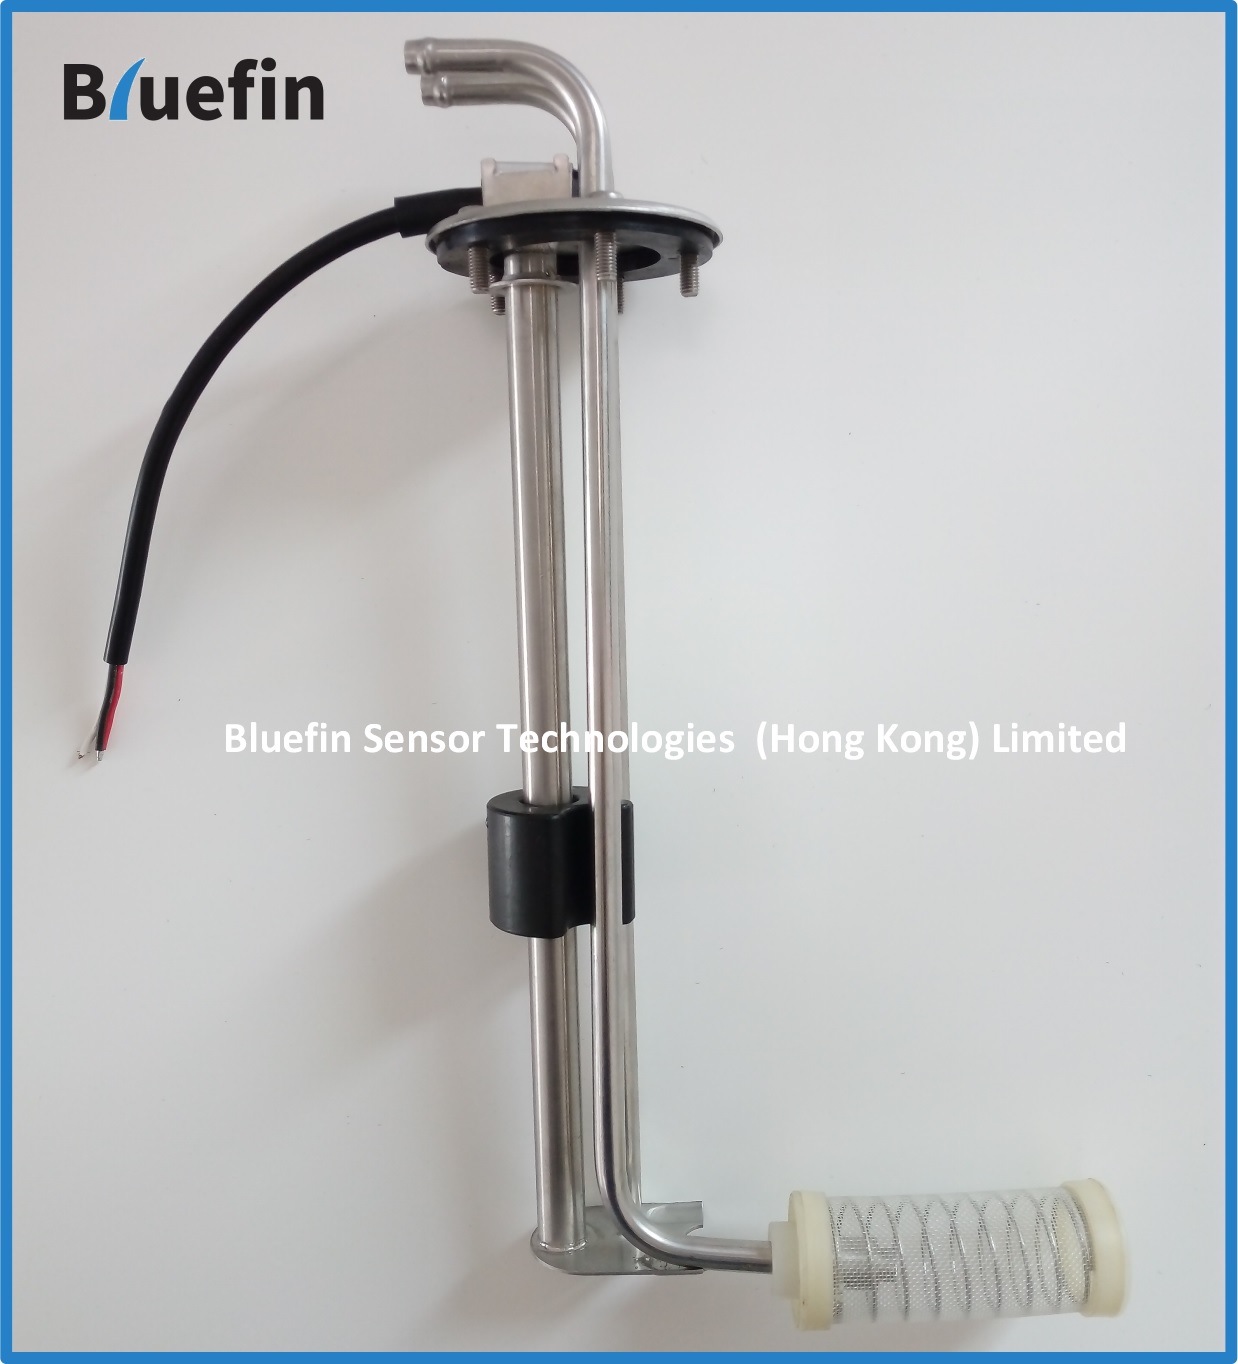 Genset/Truck Tn Series Fuel Level Sensor with Suction and Return Pipe